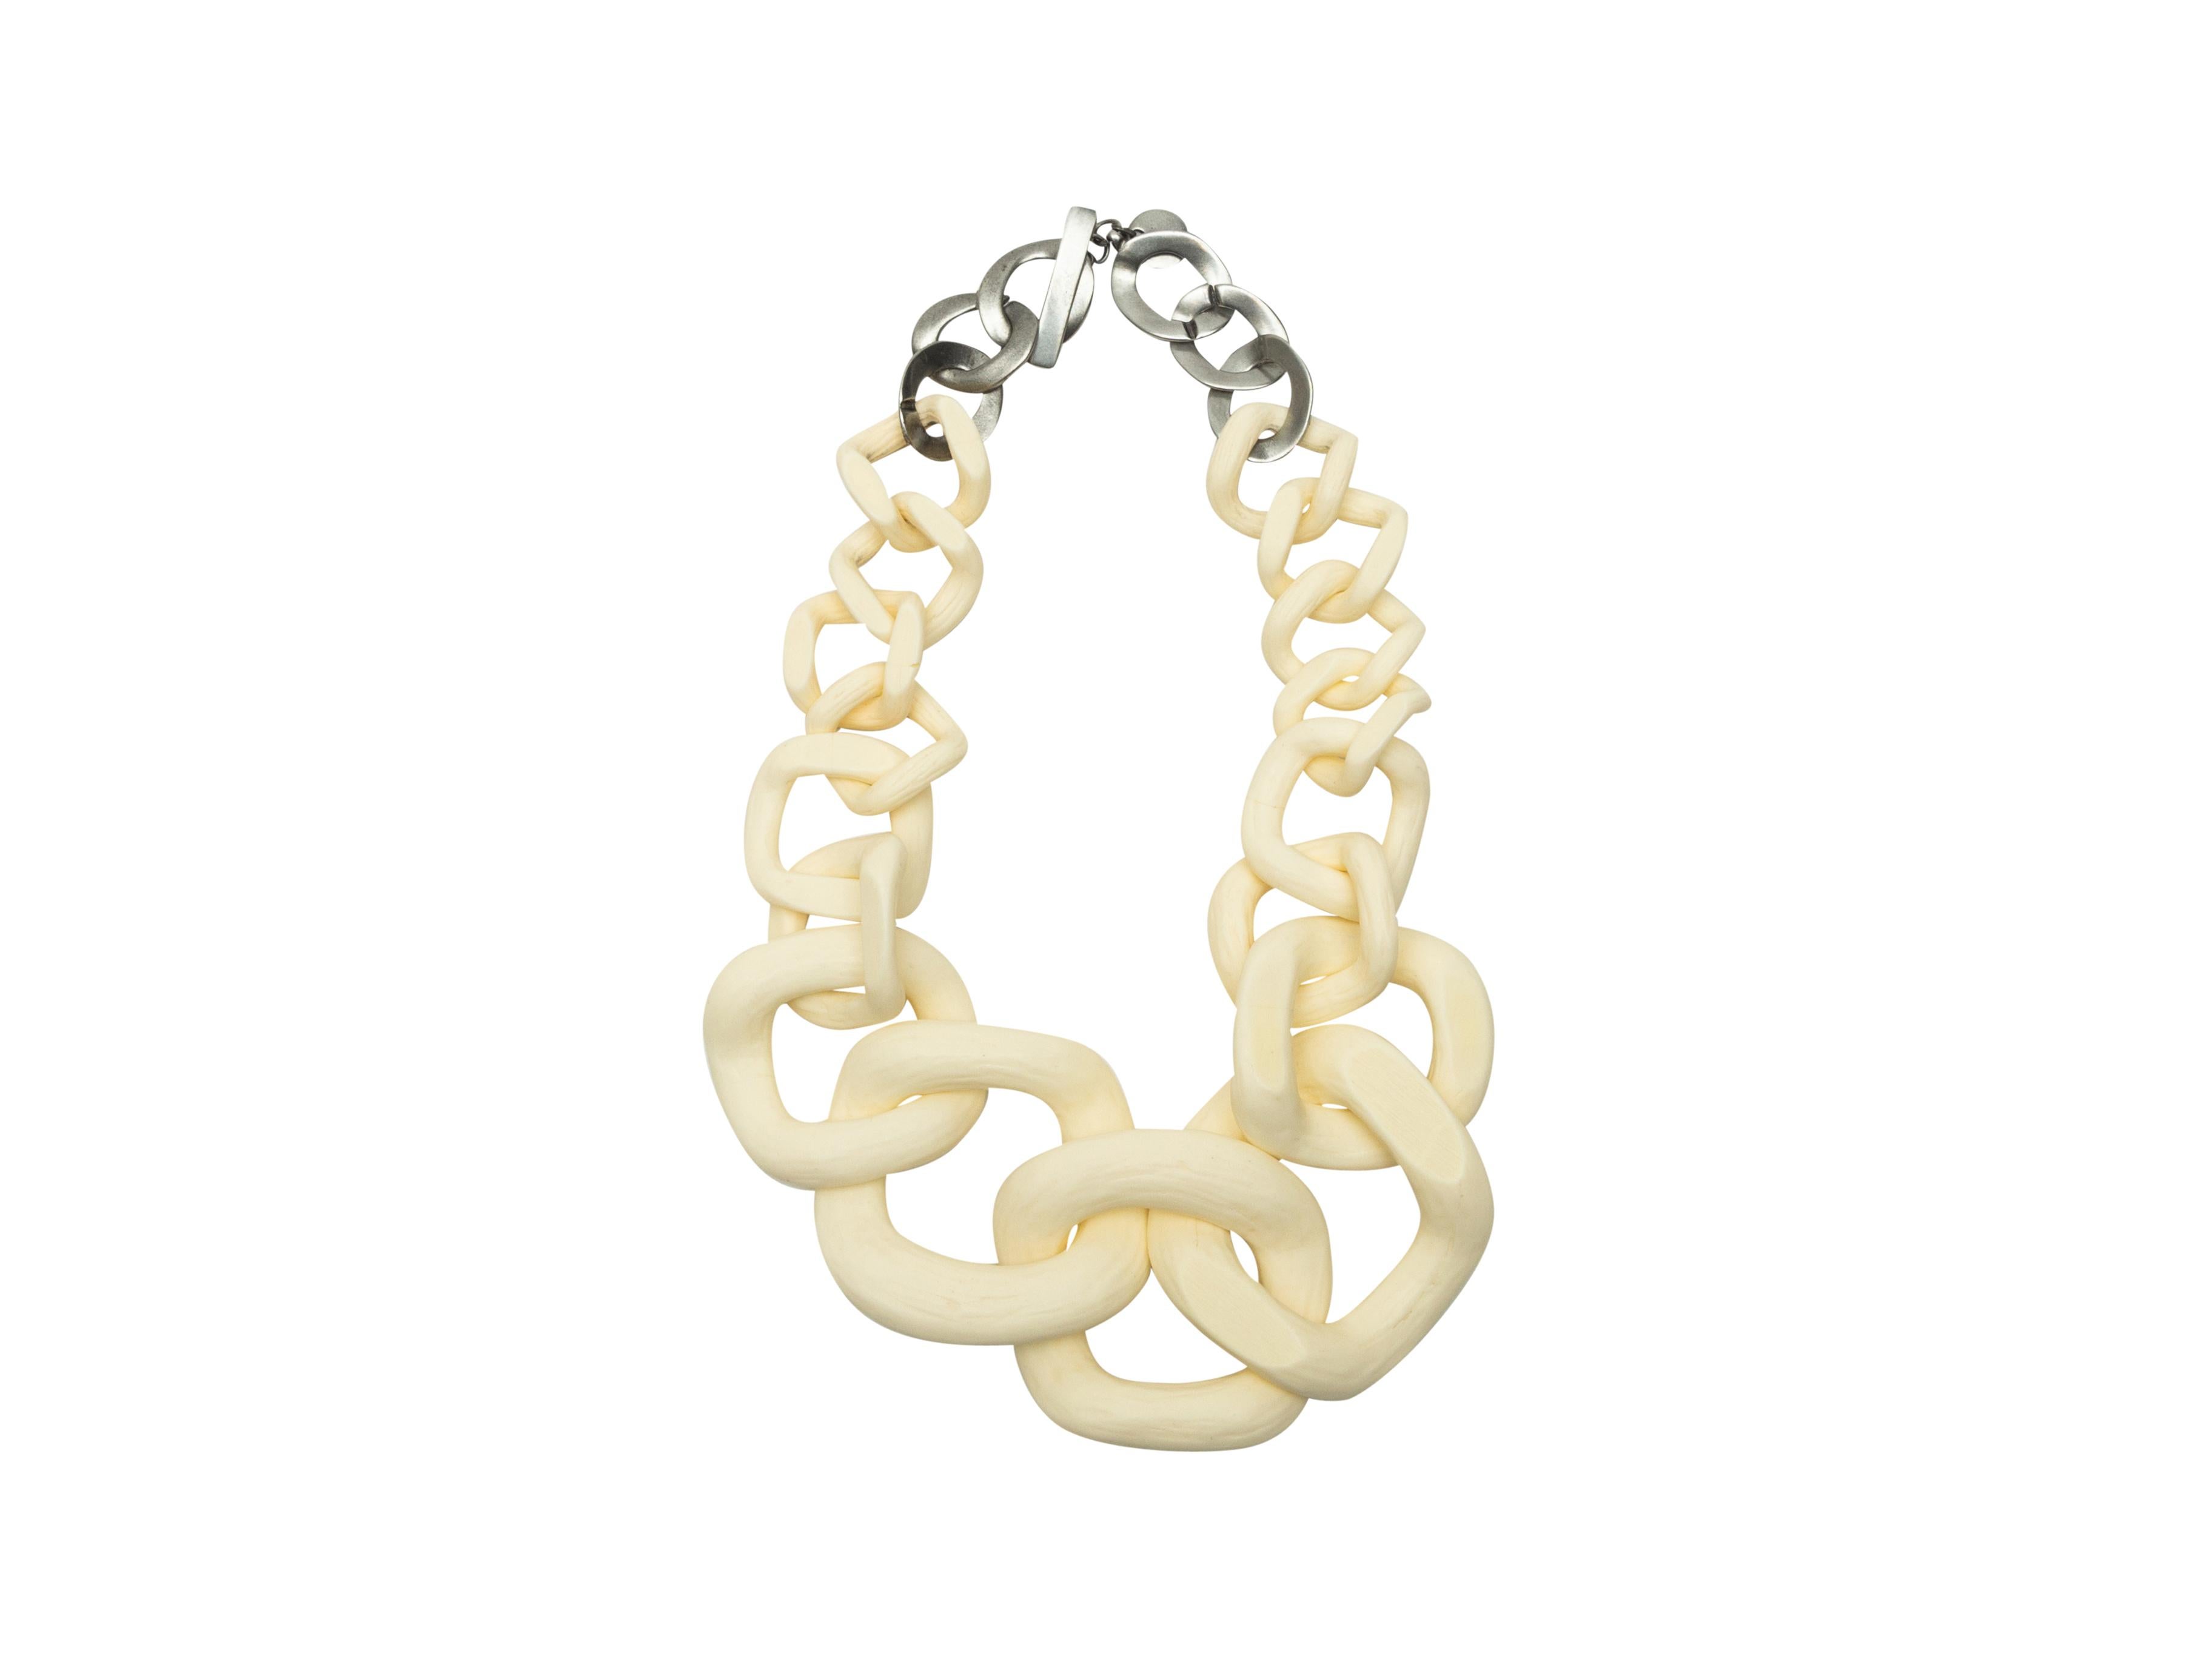 Product details: Cream and silver large link necklace by Jennifer Miller. Closure at end. 24